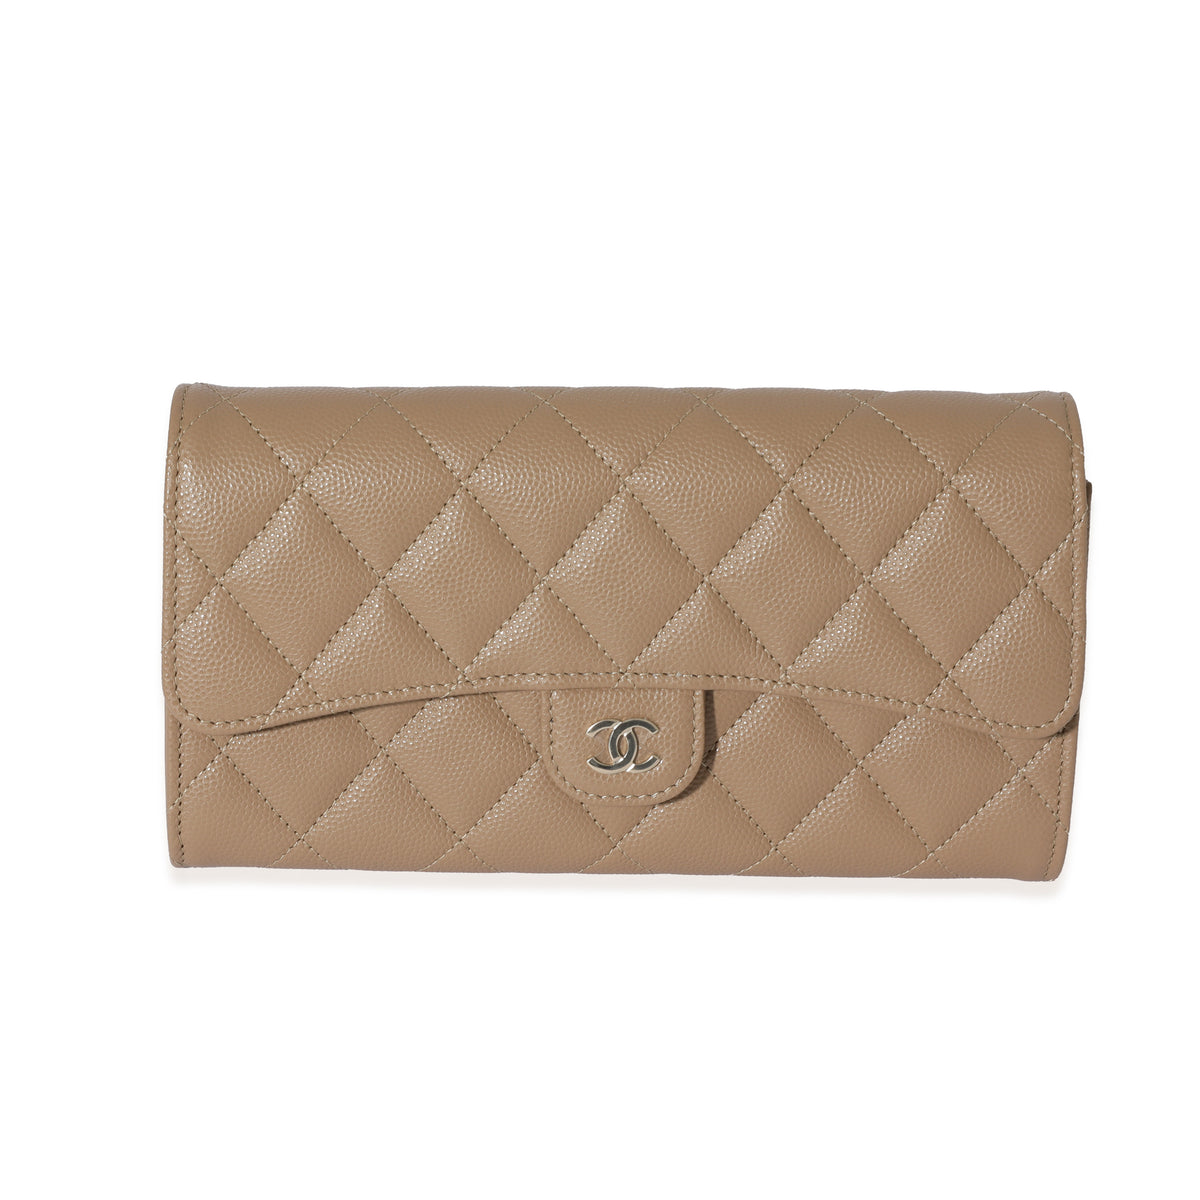 CHANEL, Bags, Chanel Classic Long Flap Wallet